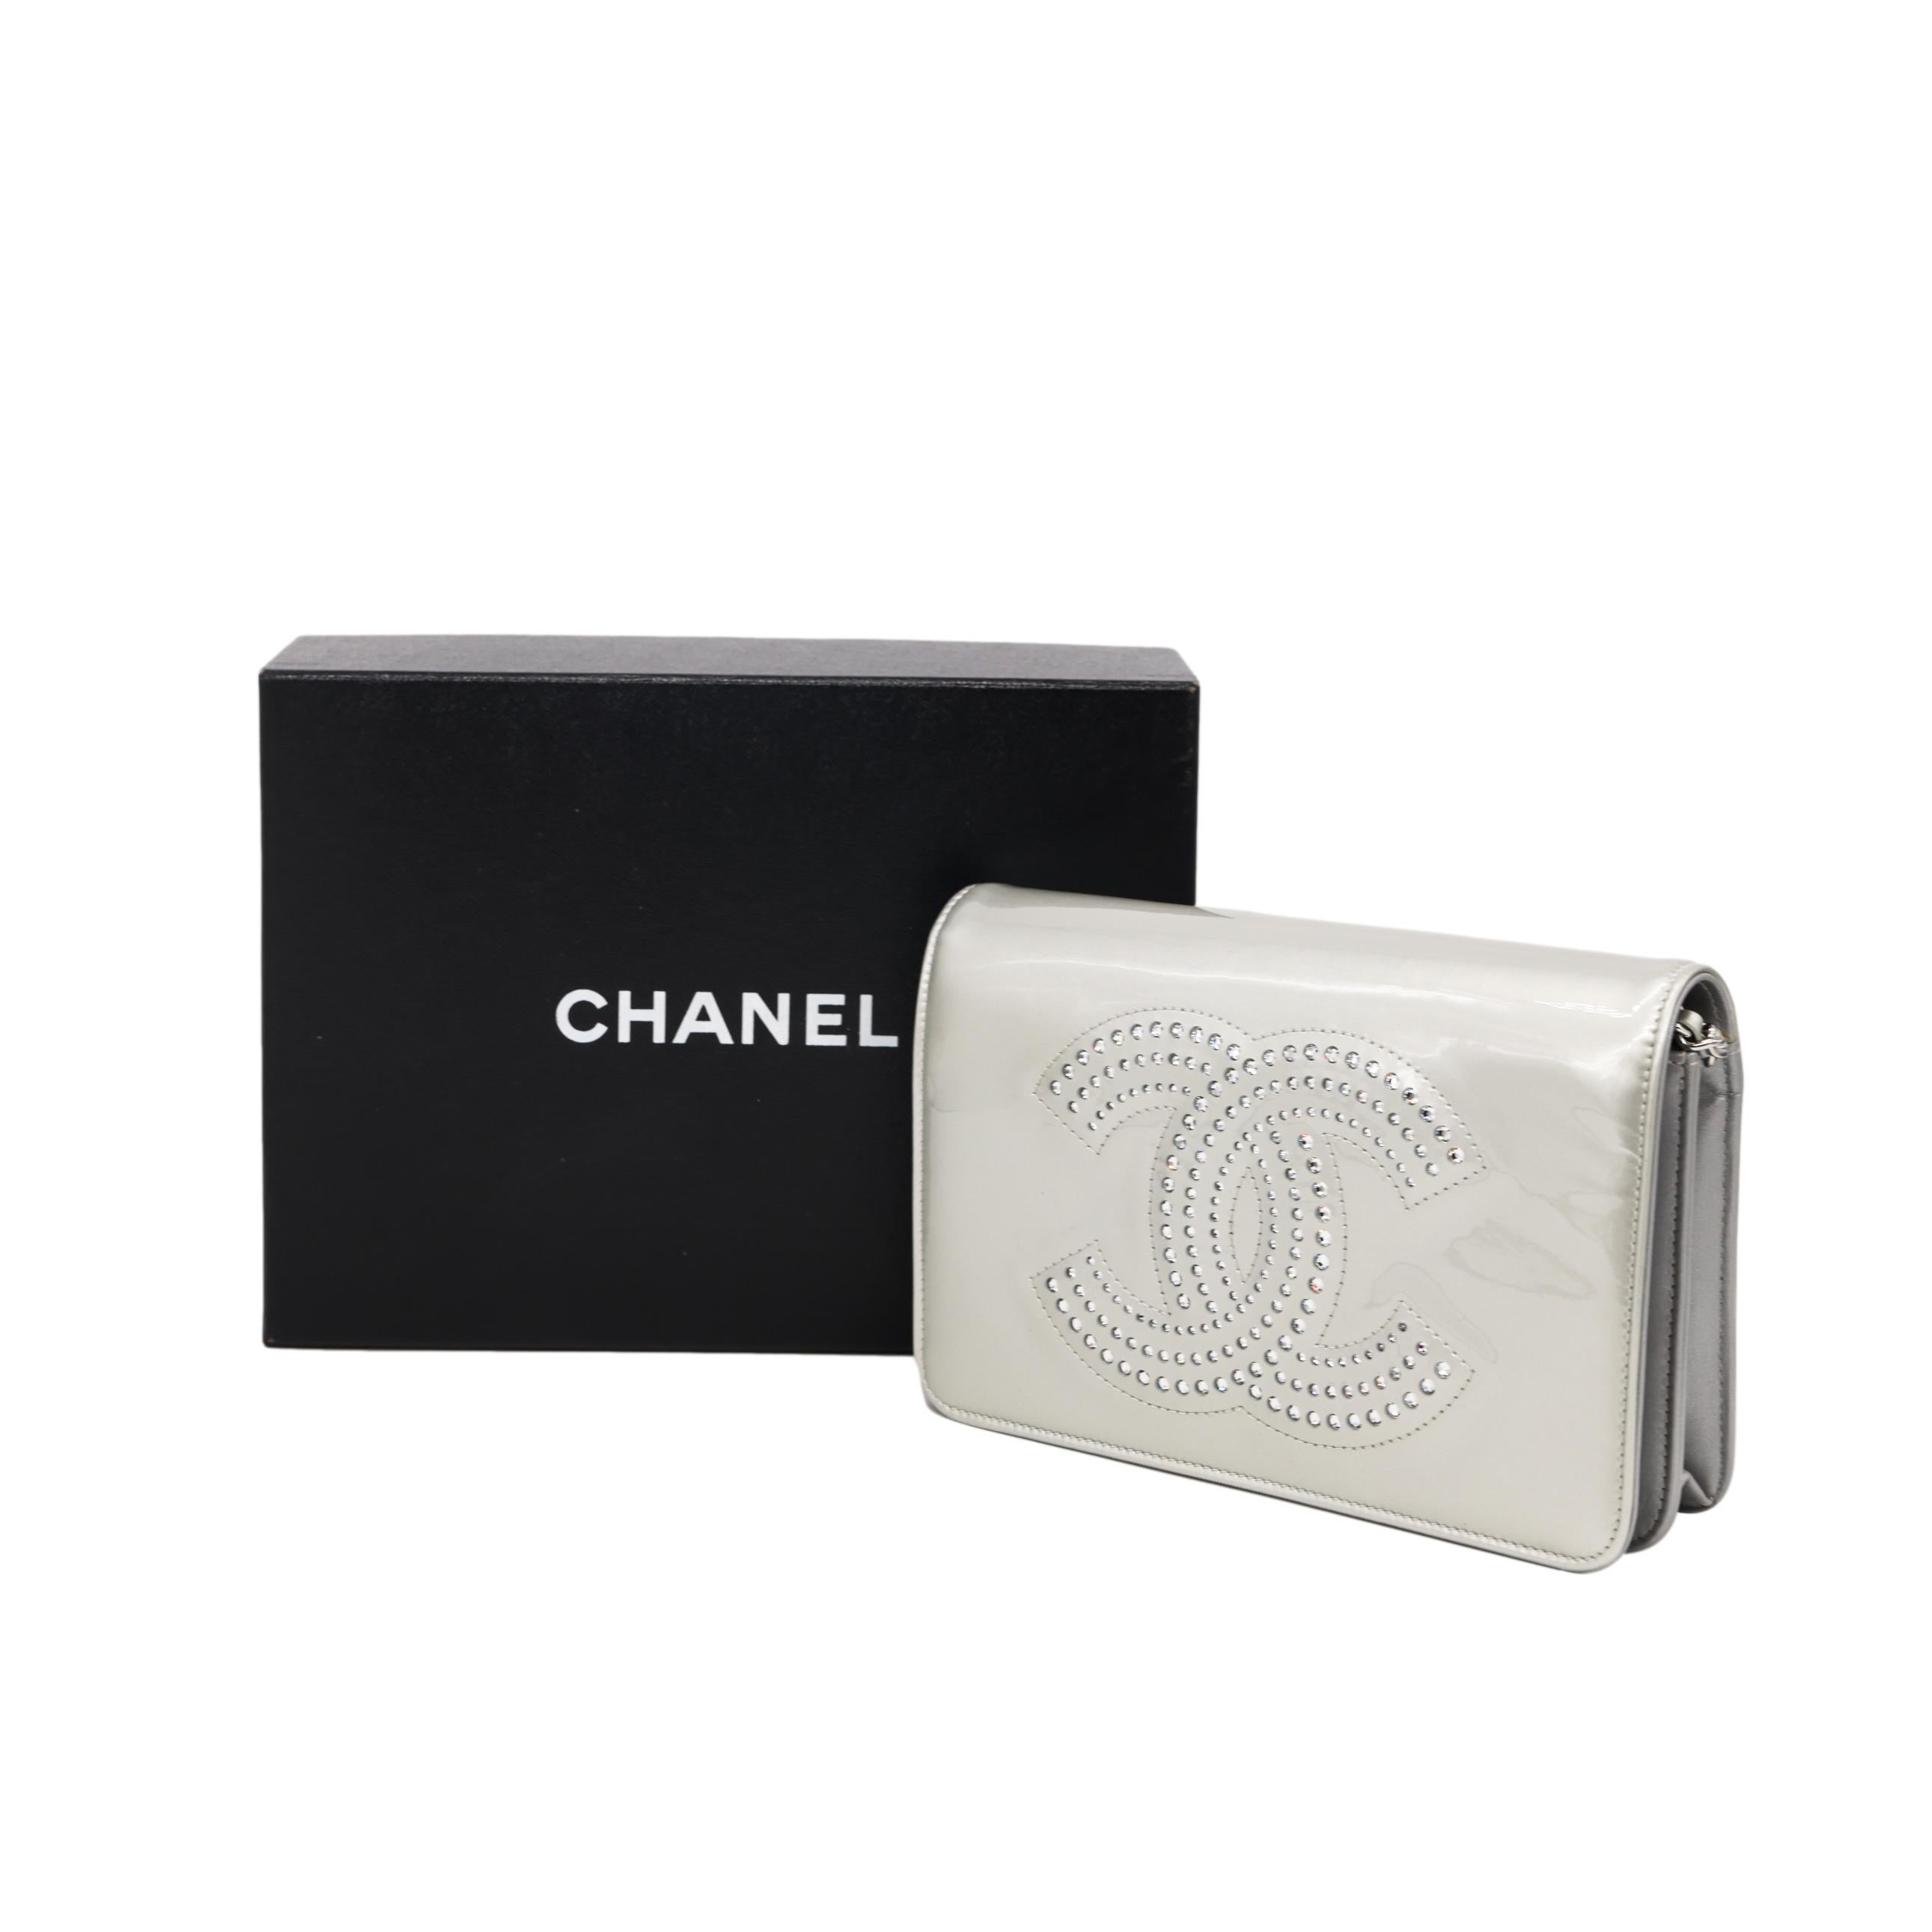 Chanel Silver Patent Leather Strass Wallet on Chain Clutch Crossbody Bag, 2009. 11